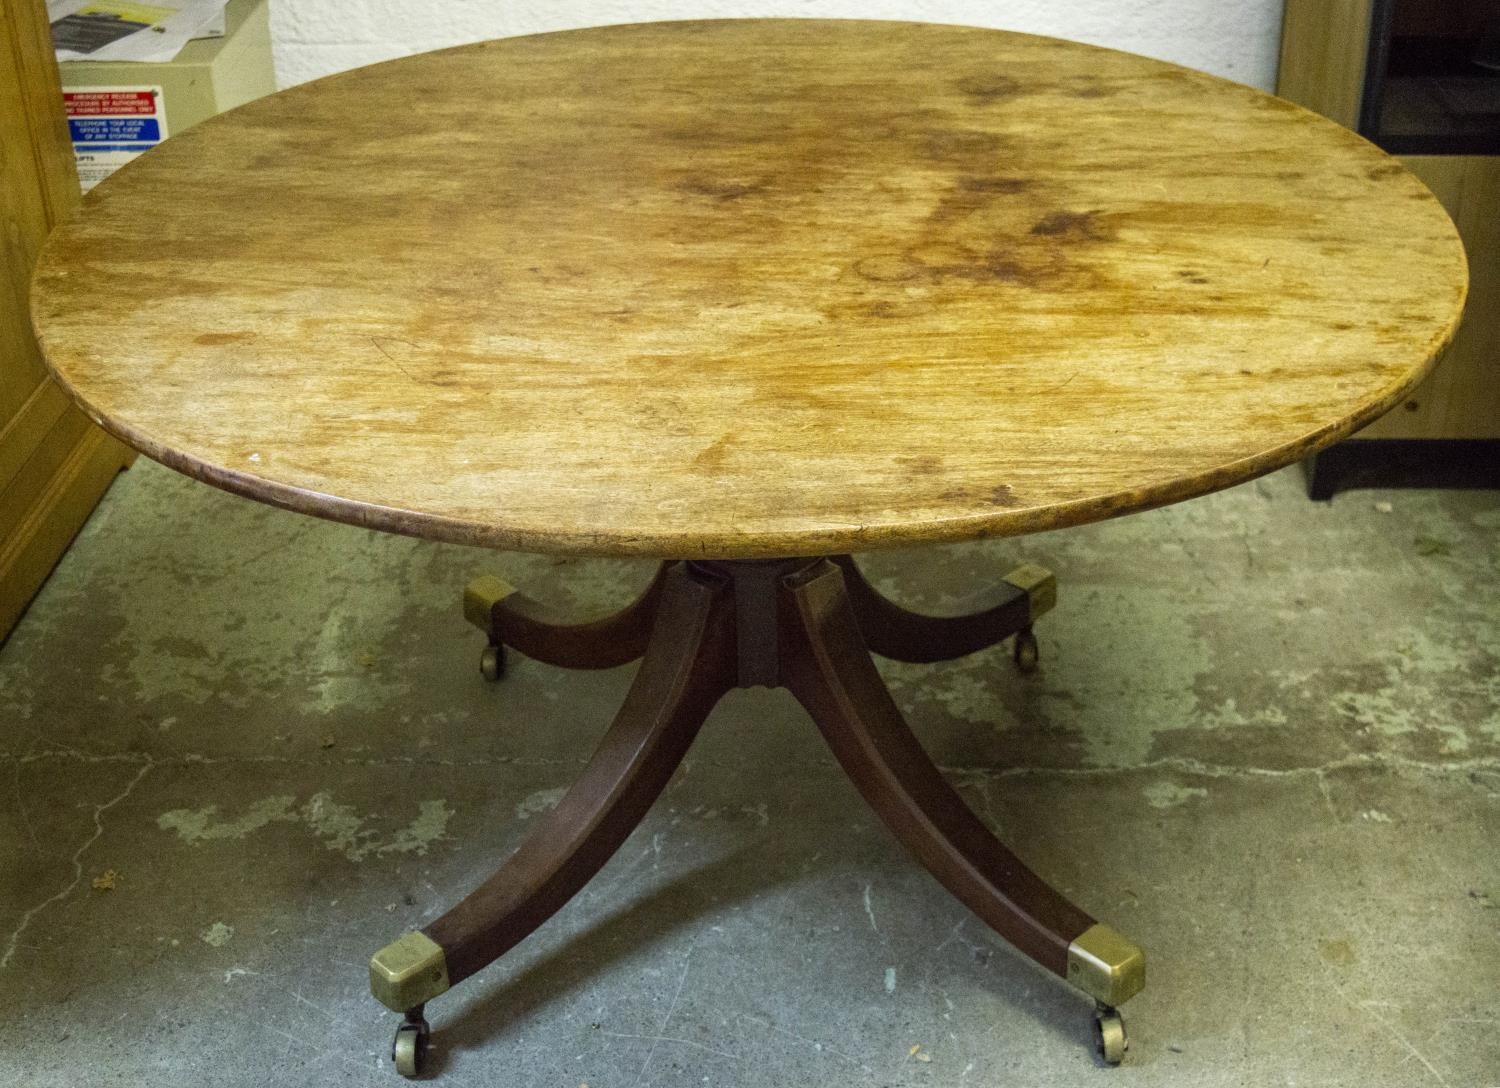 BREAKFAST TABLE, 68cm H x 119cm x 123cm, early 19th century, George III mahogany, with oval tilt top